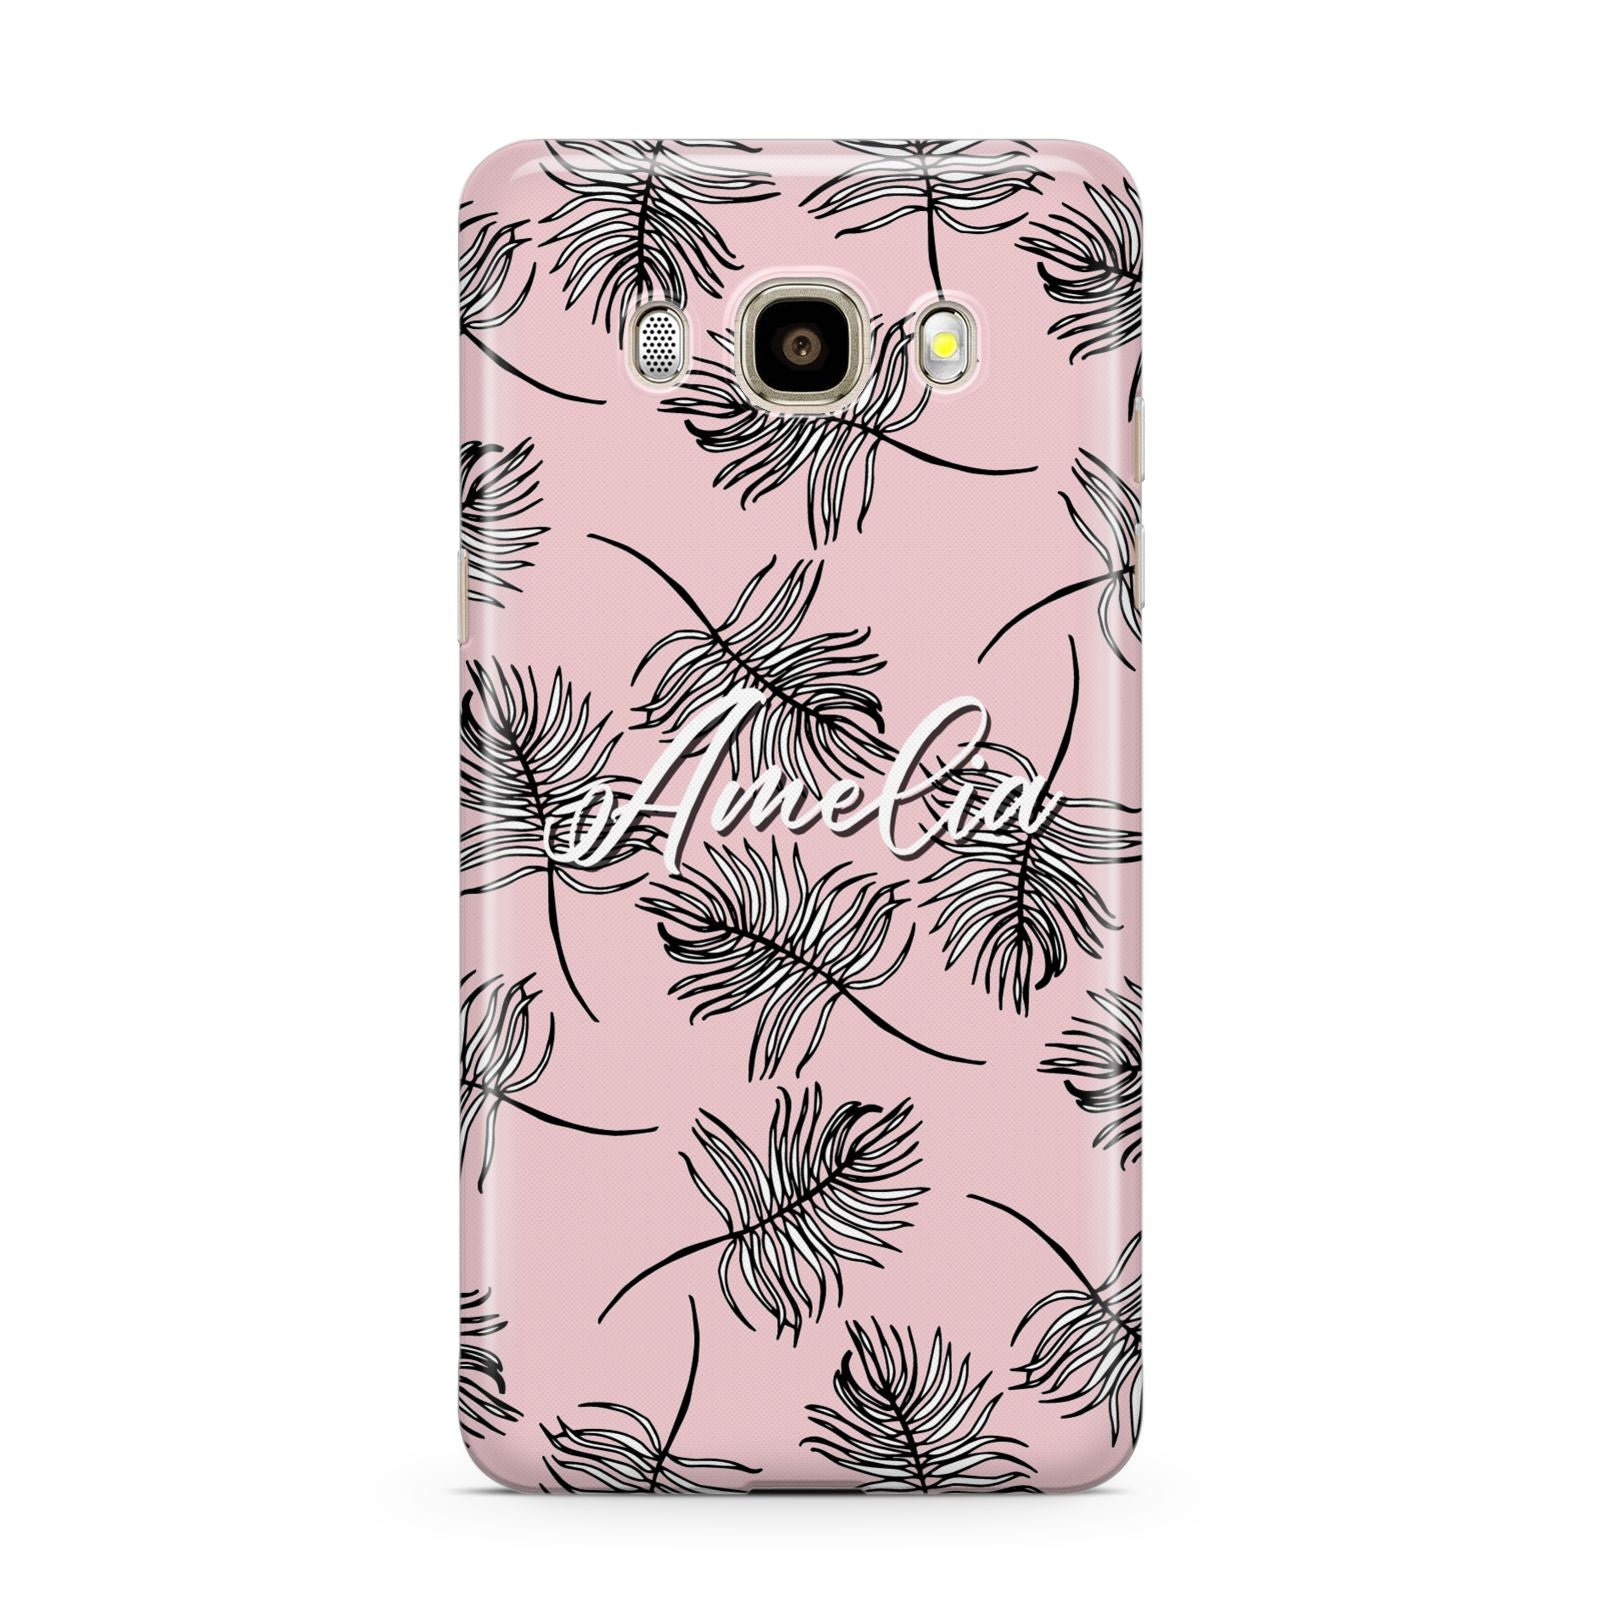 Personalised Pink Monochrome Tropical Leaf Samsung Galaxy J7 2016 Case on gold phone